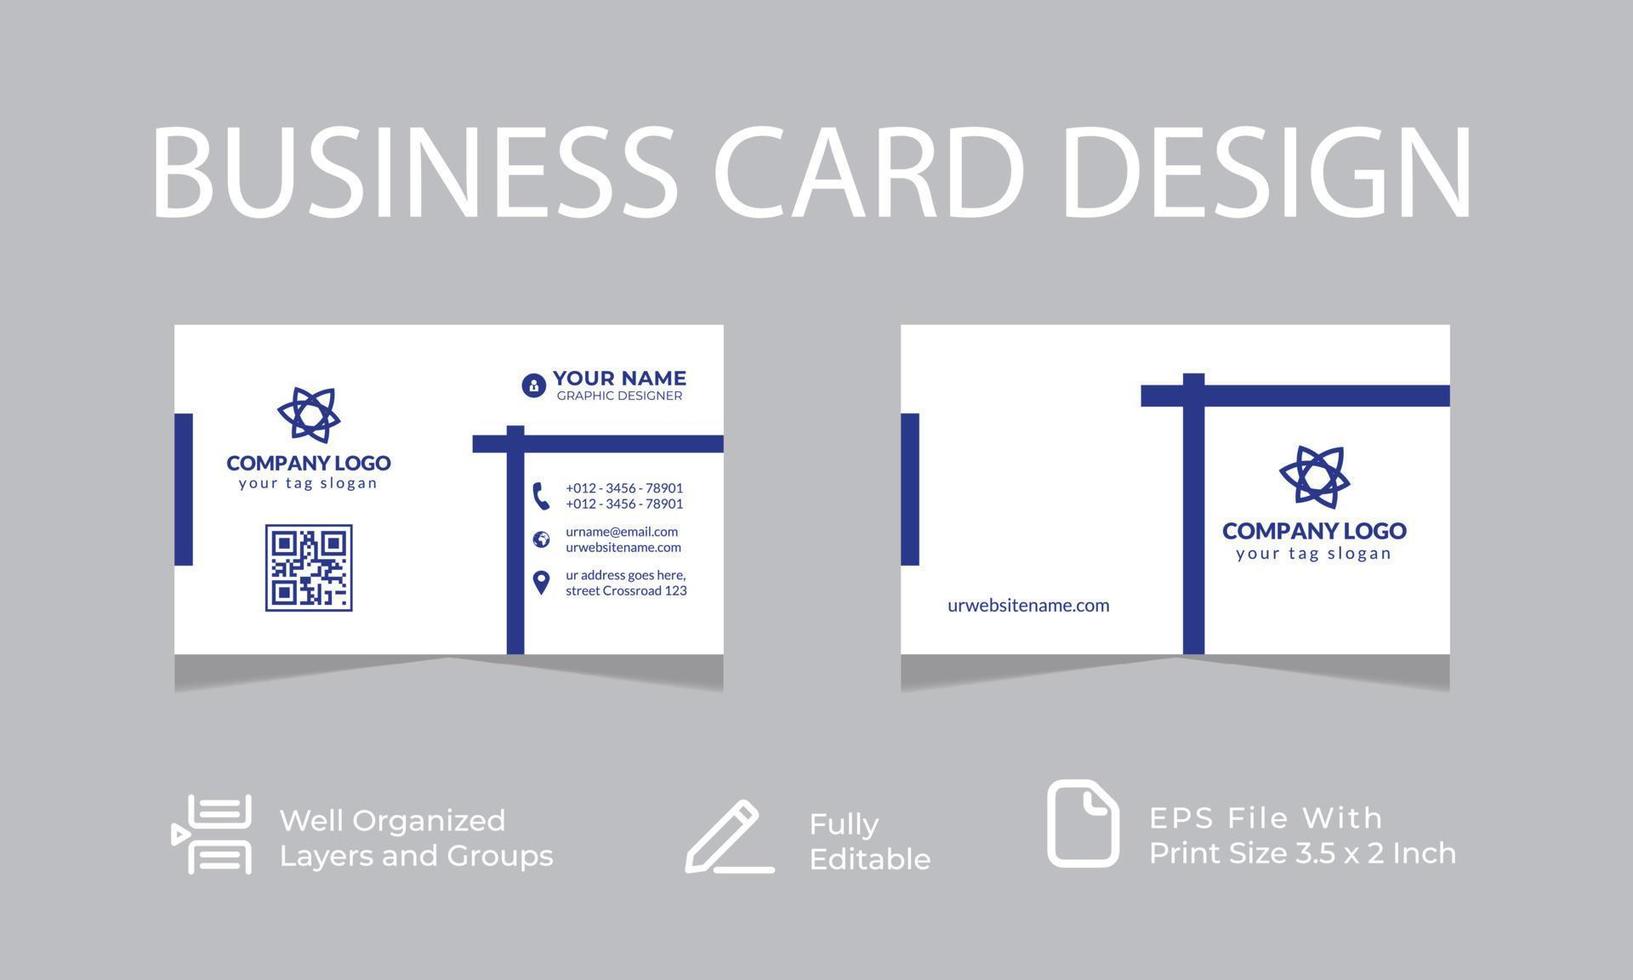 Simple business card template Vector illustration